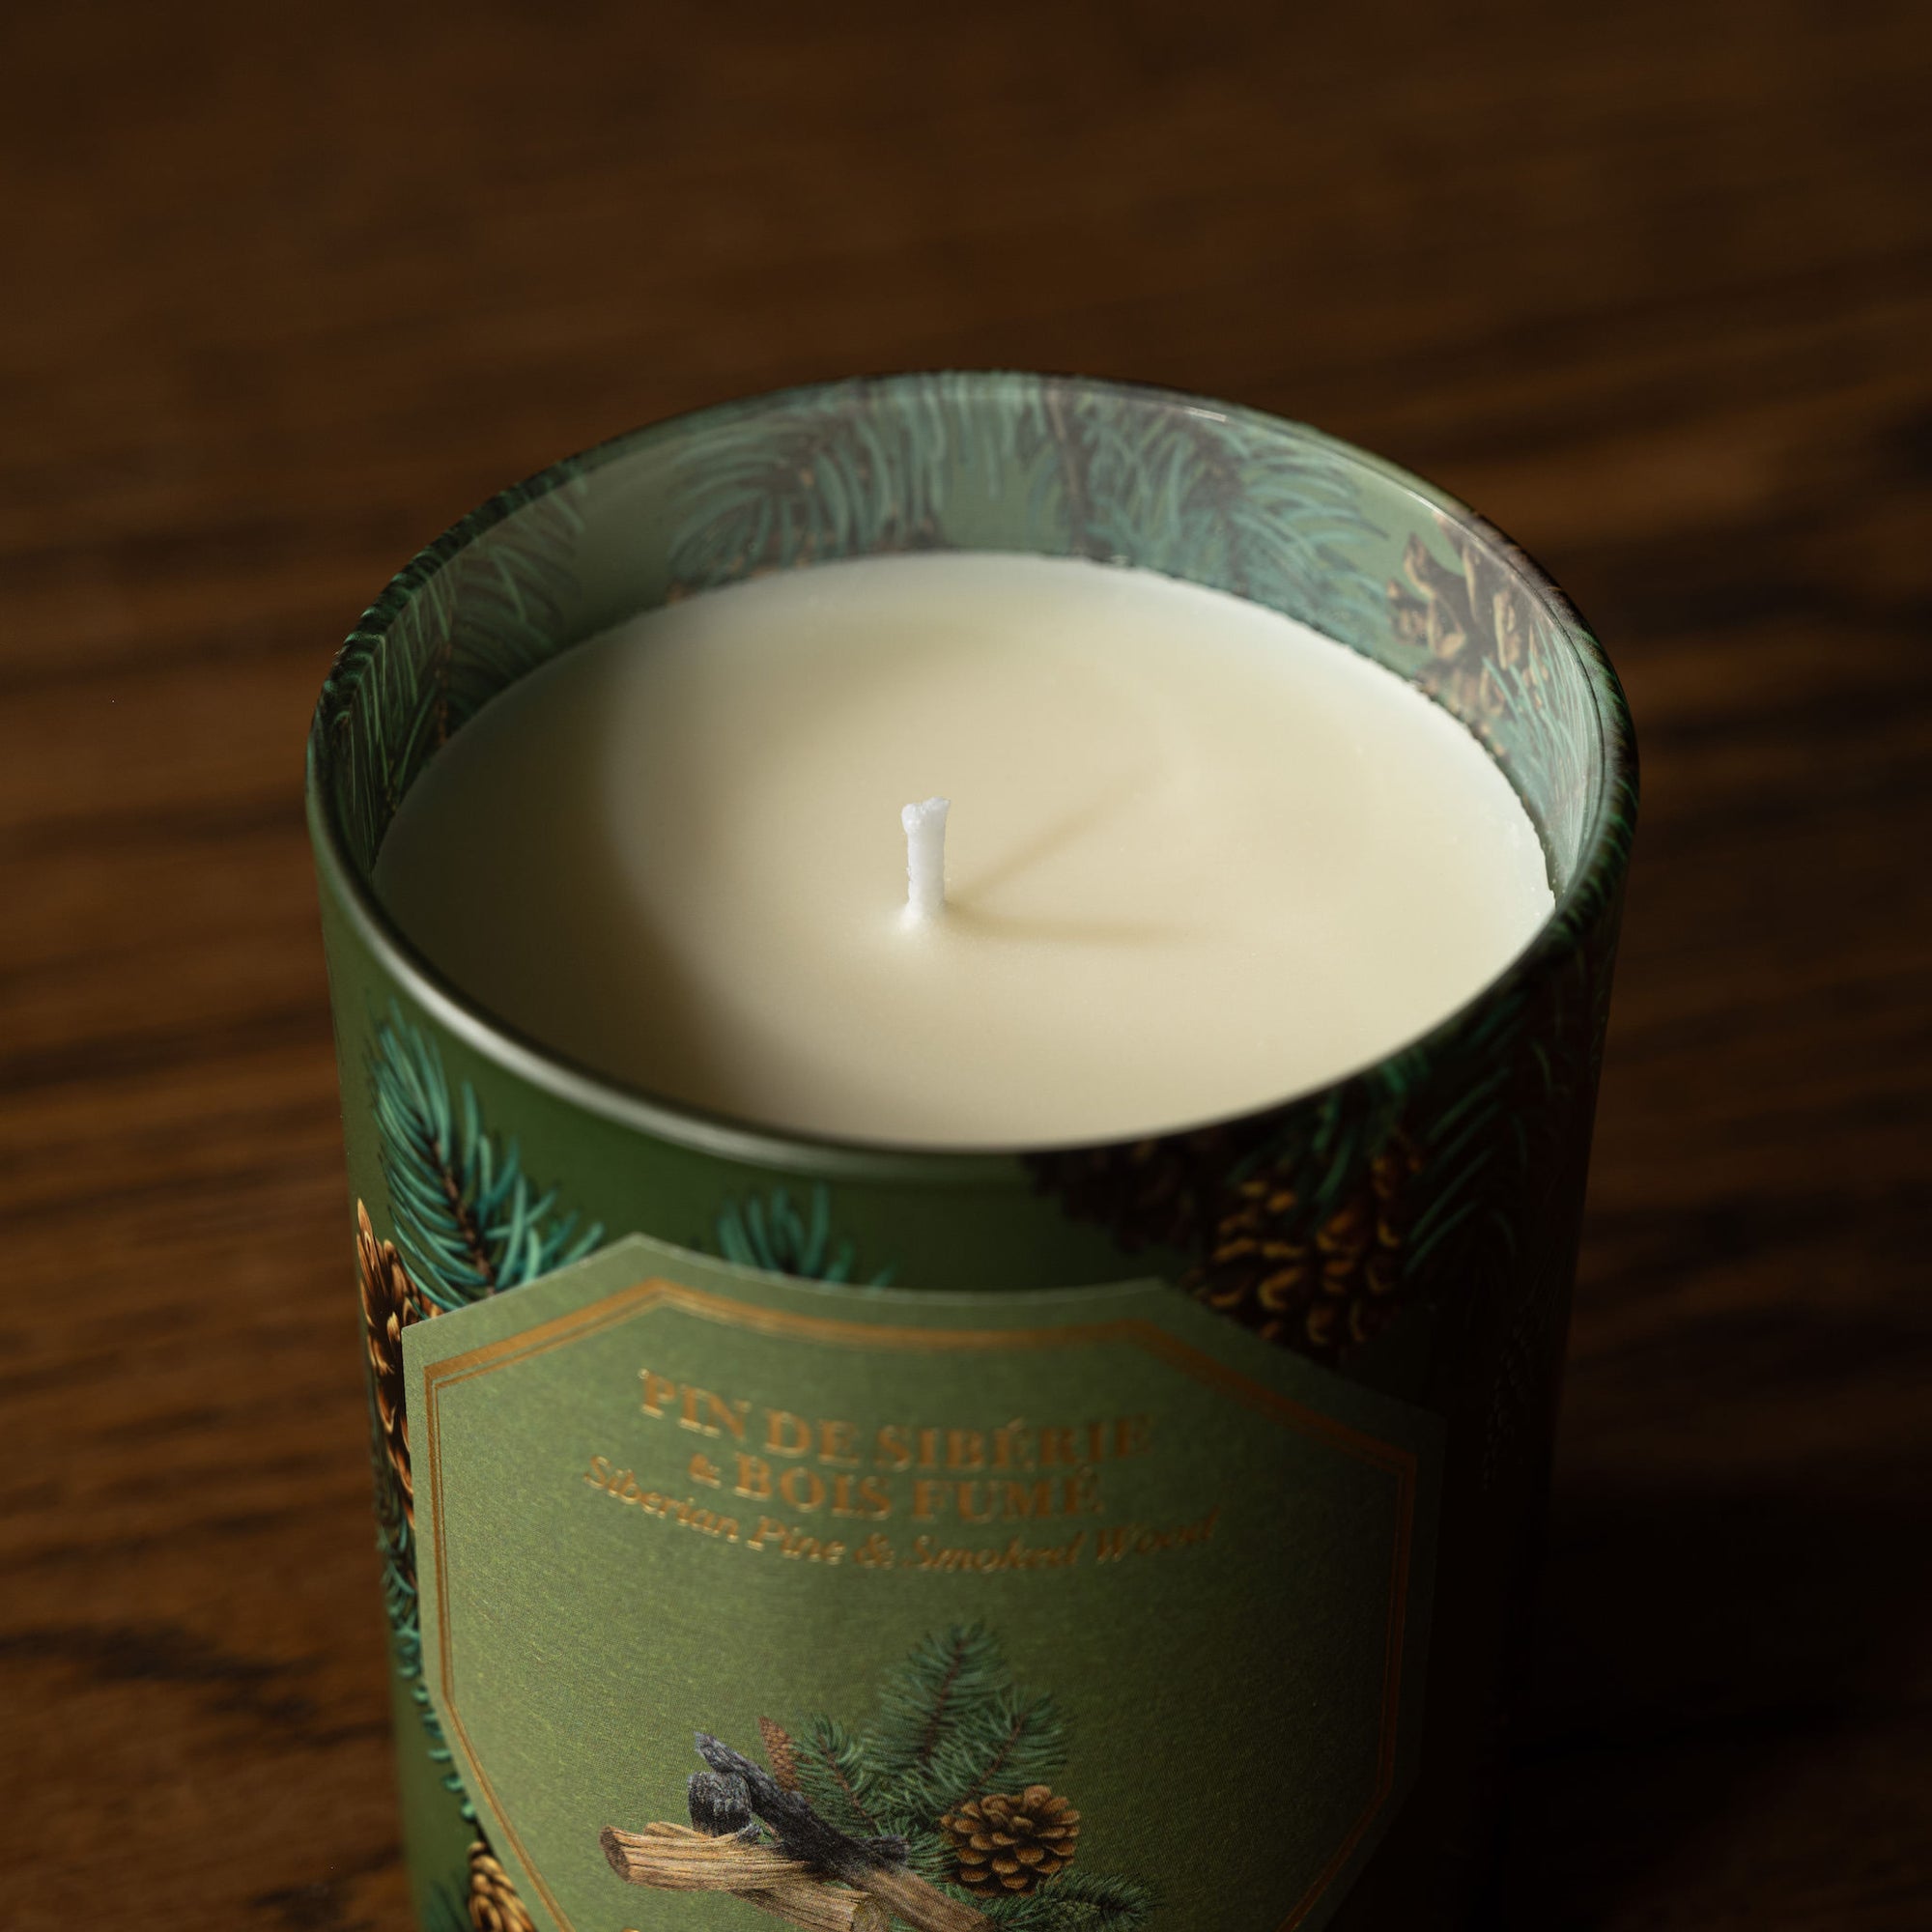 Carriere Freres Siberian Pine & Smoked Wood Candle wax & wick